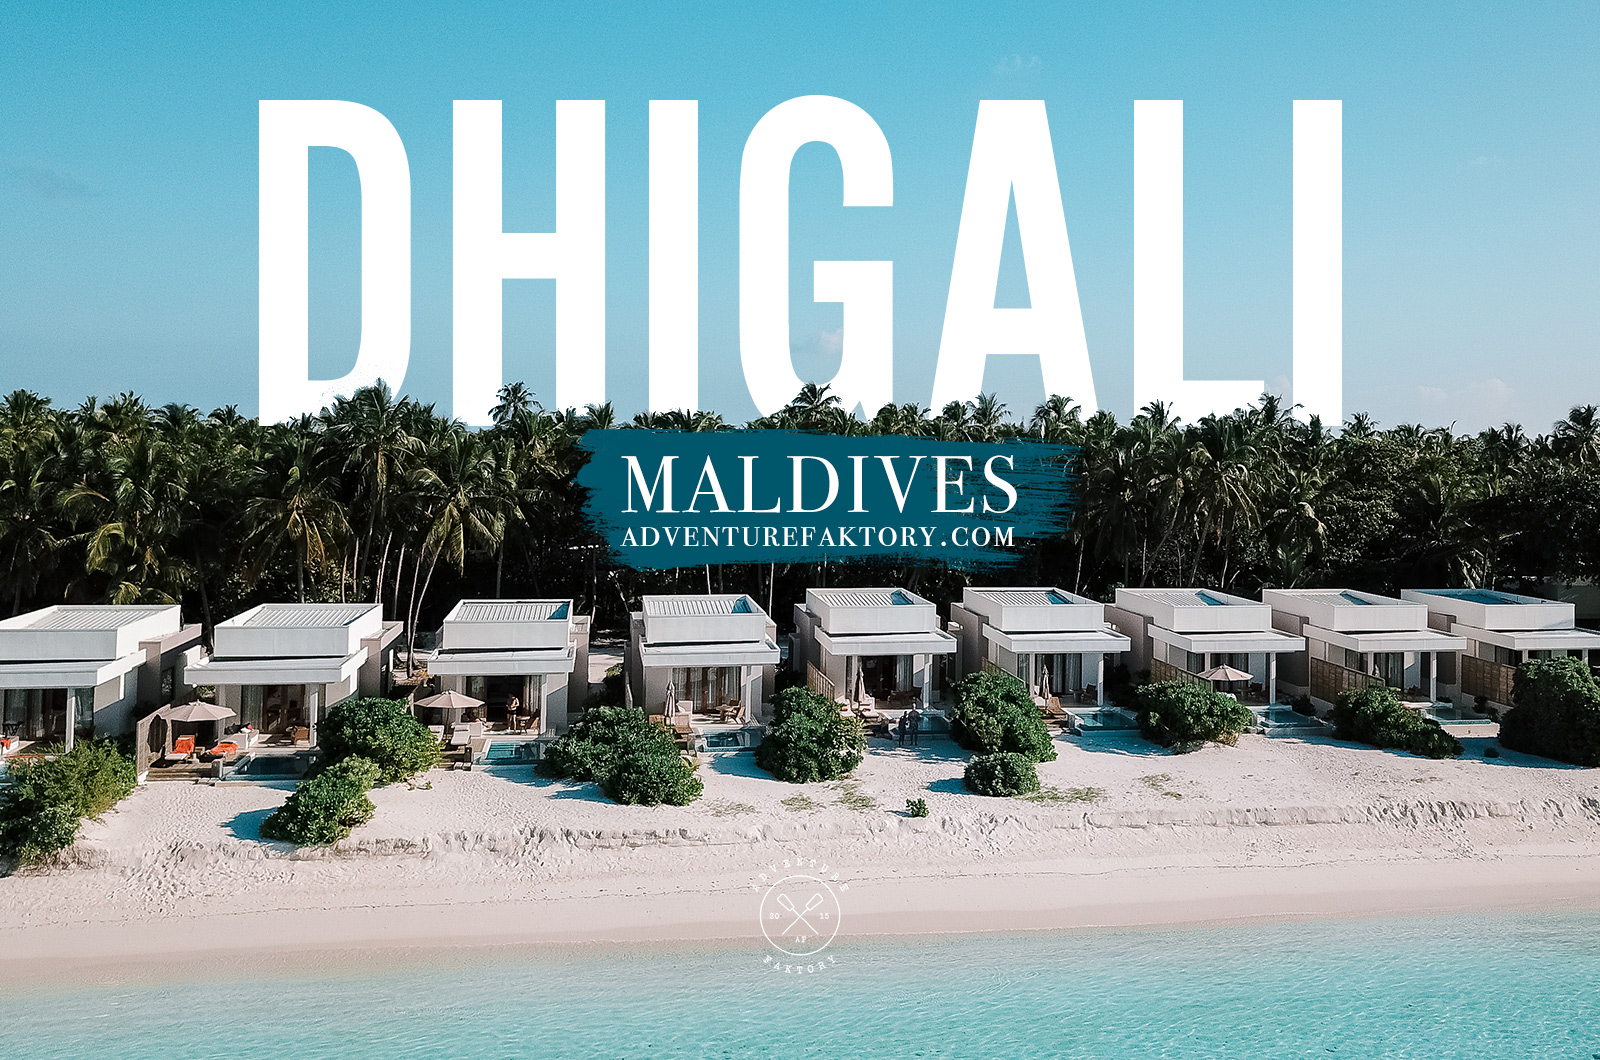 Where to stay in the Maldives: Dhigali